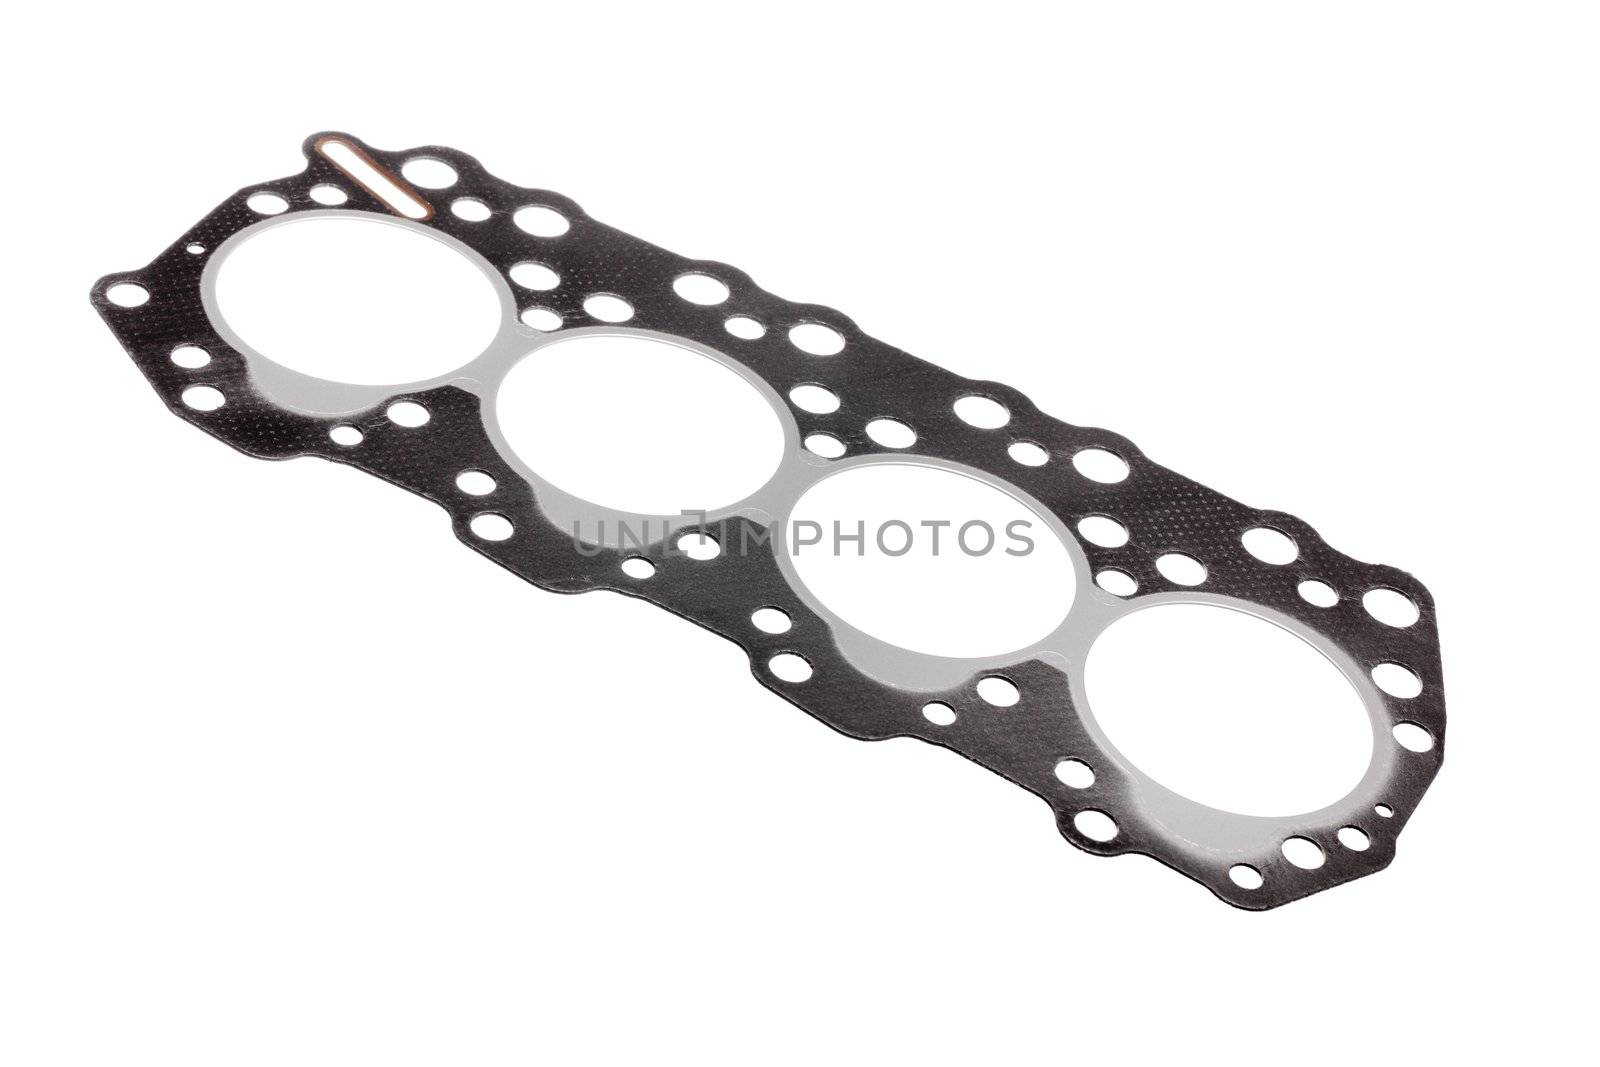 Head Gasket engine part isolated on white